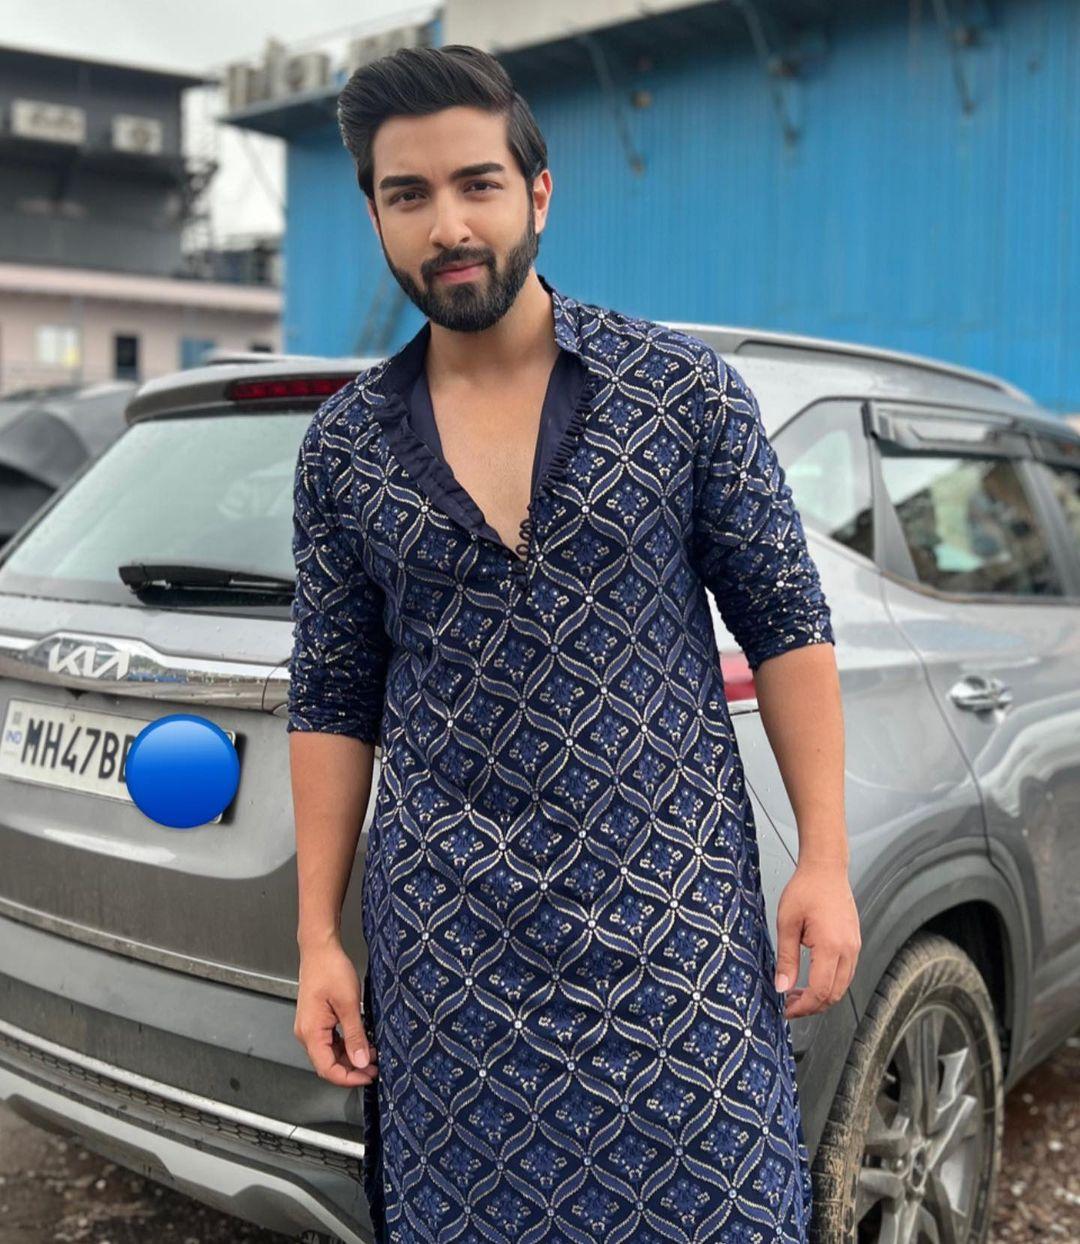 In yet another appearance, Rohit wore a blue kurta, and oh Lord, how incredibly hot does he look! 